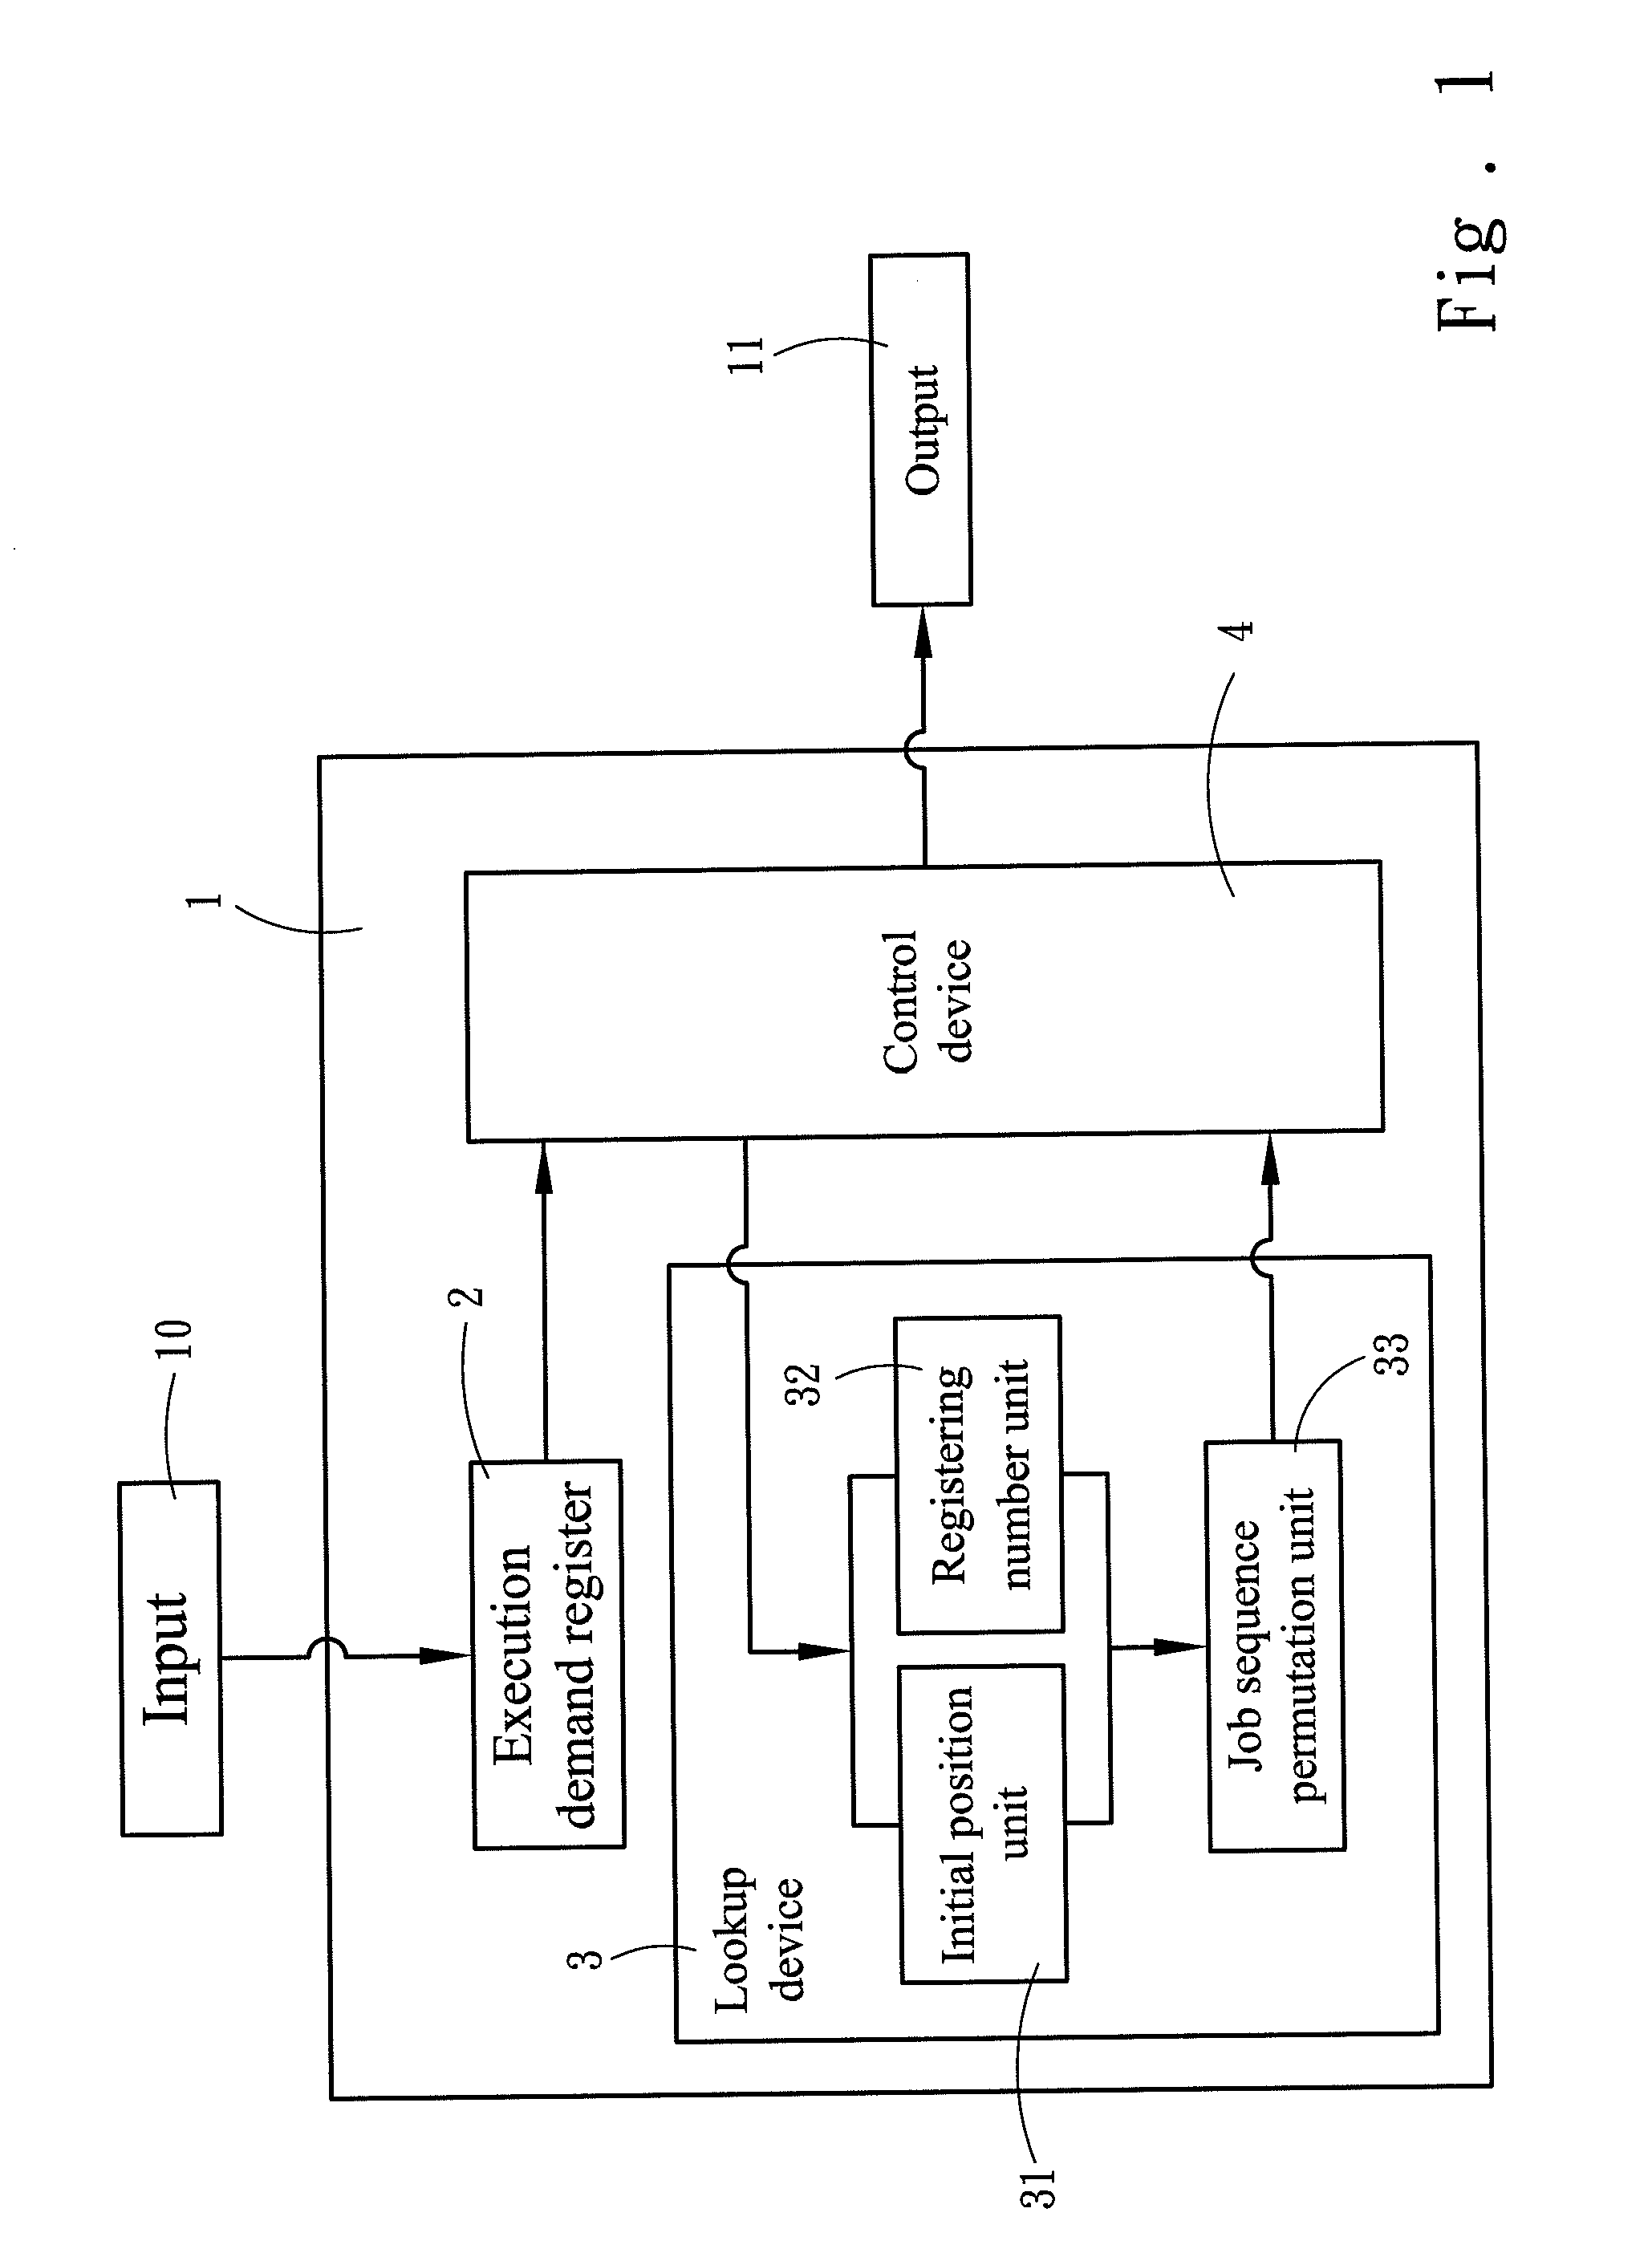 Method for registering and scheduling execution demands